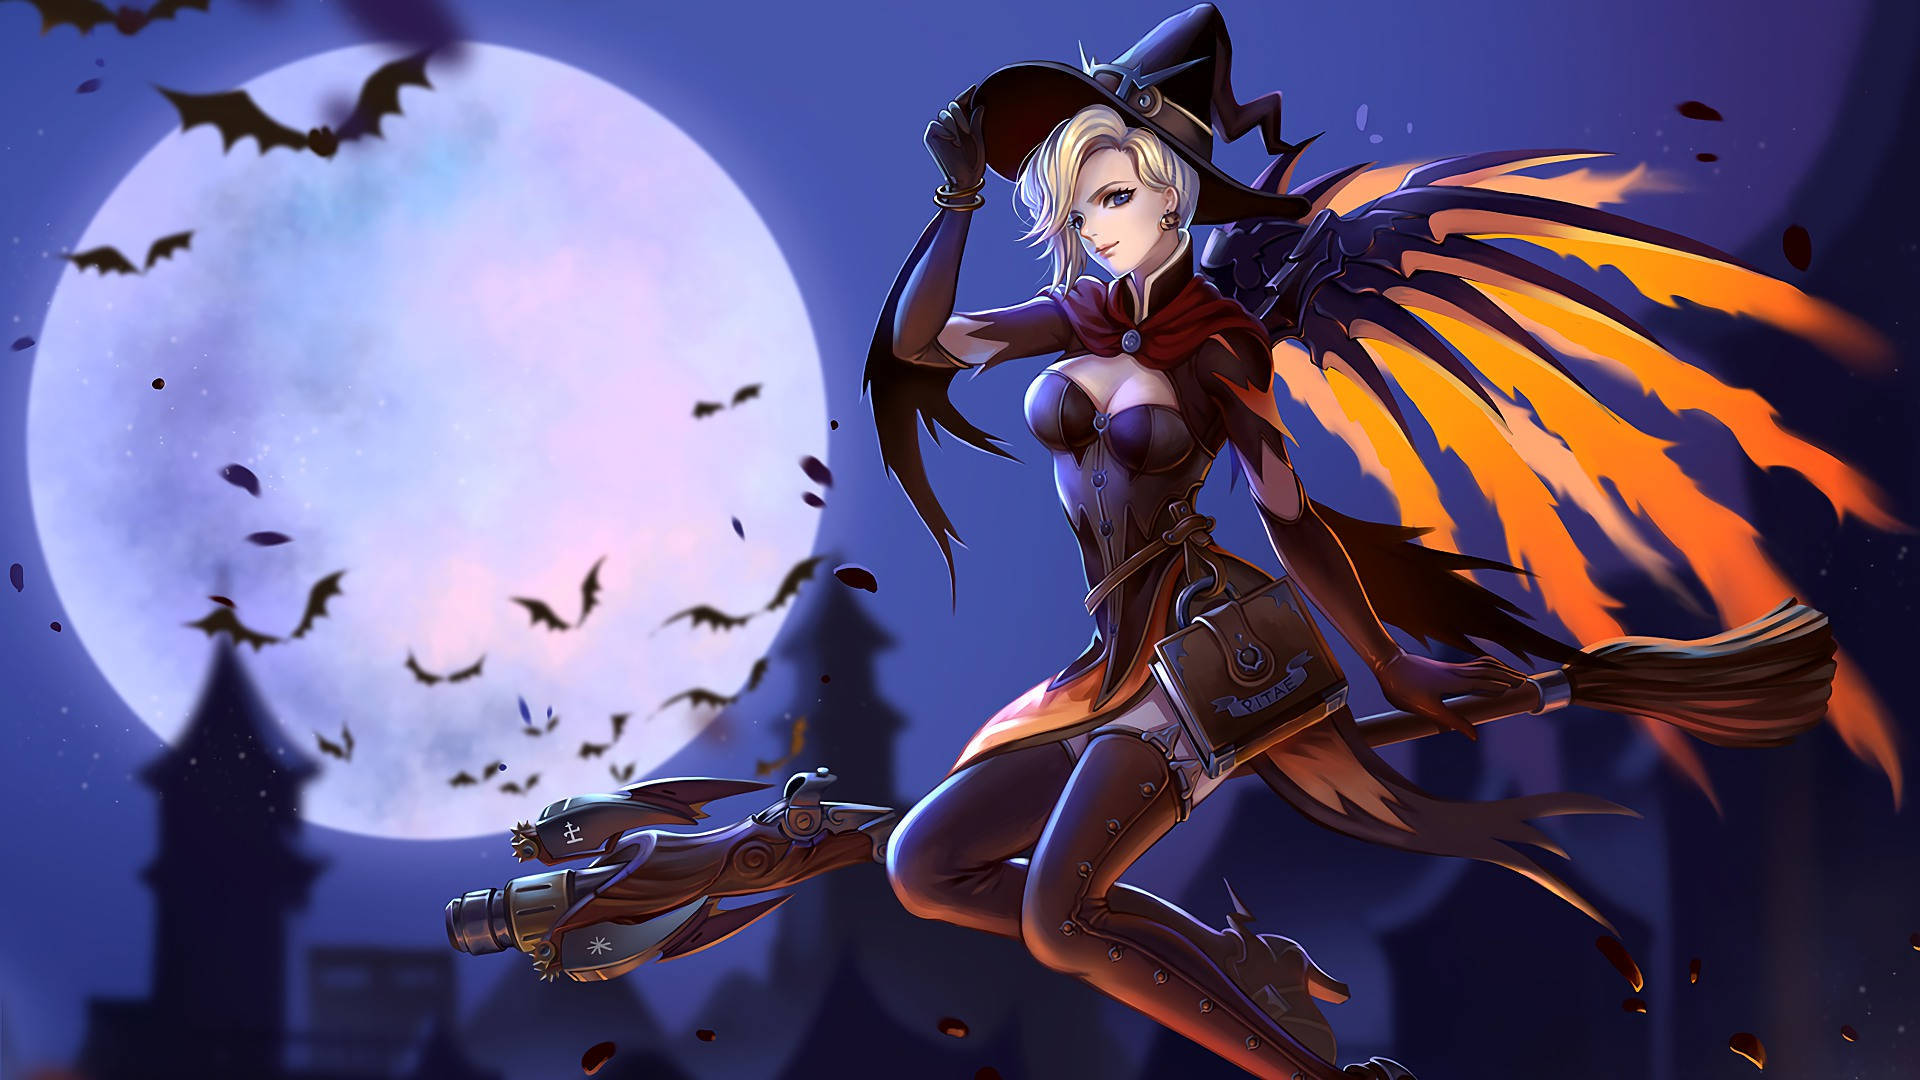 Witchy Anime Girl On Broomstick Background